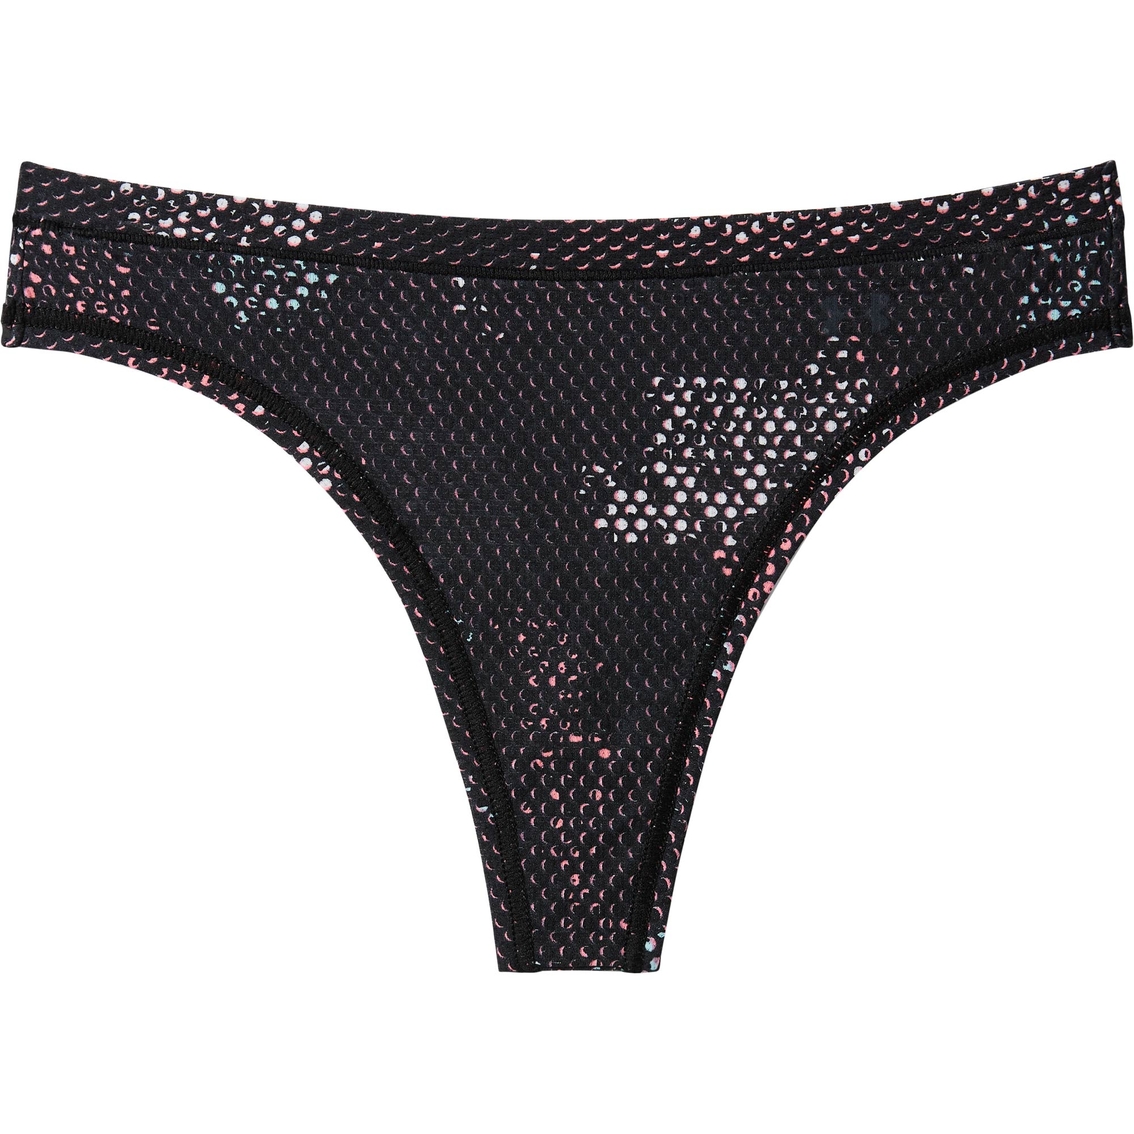 Under Armour Patterned Sheer Thong Panties | Panties | Mother's Day ...